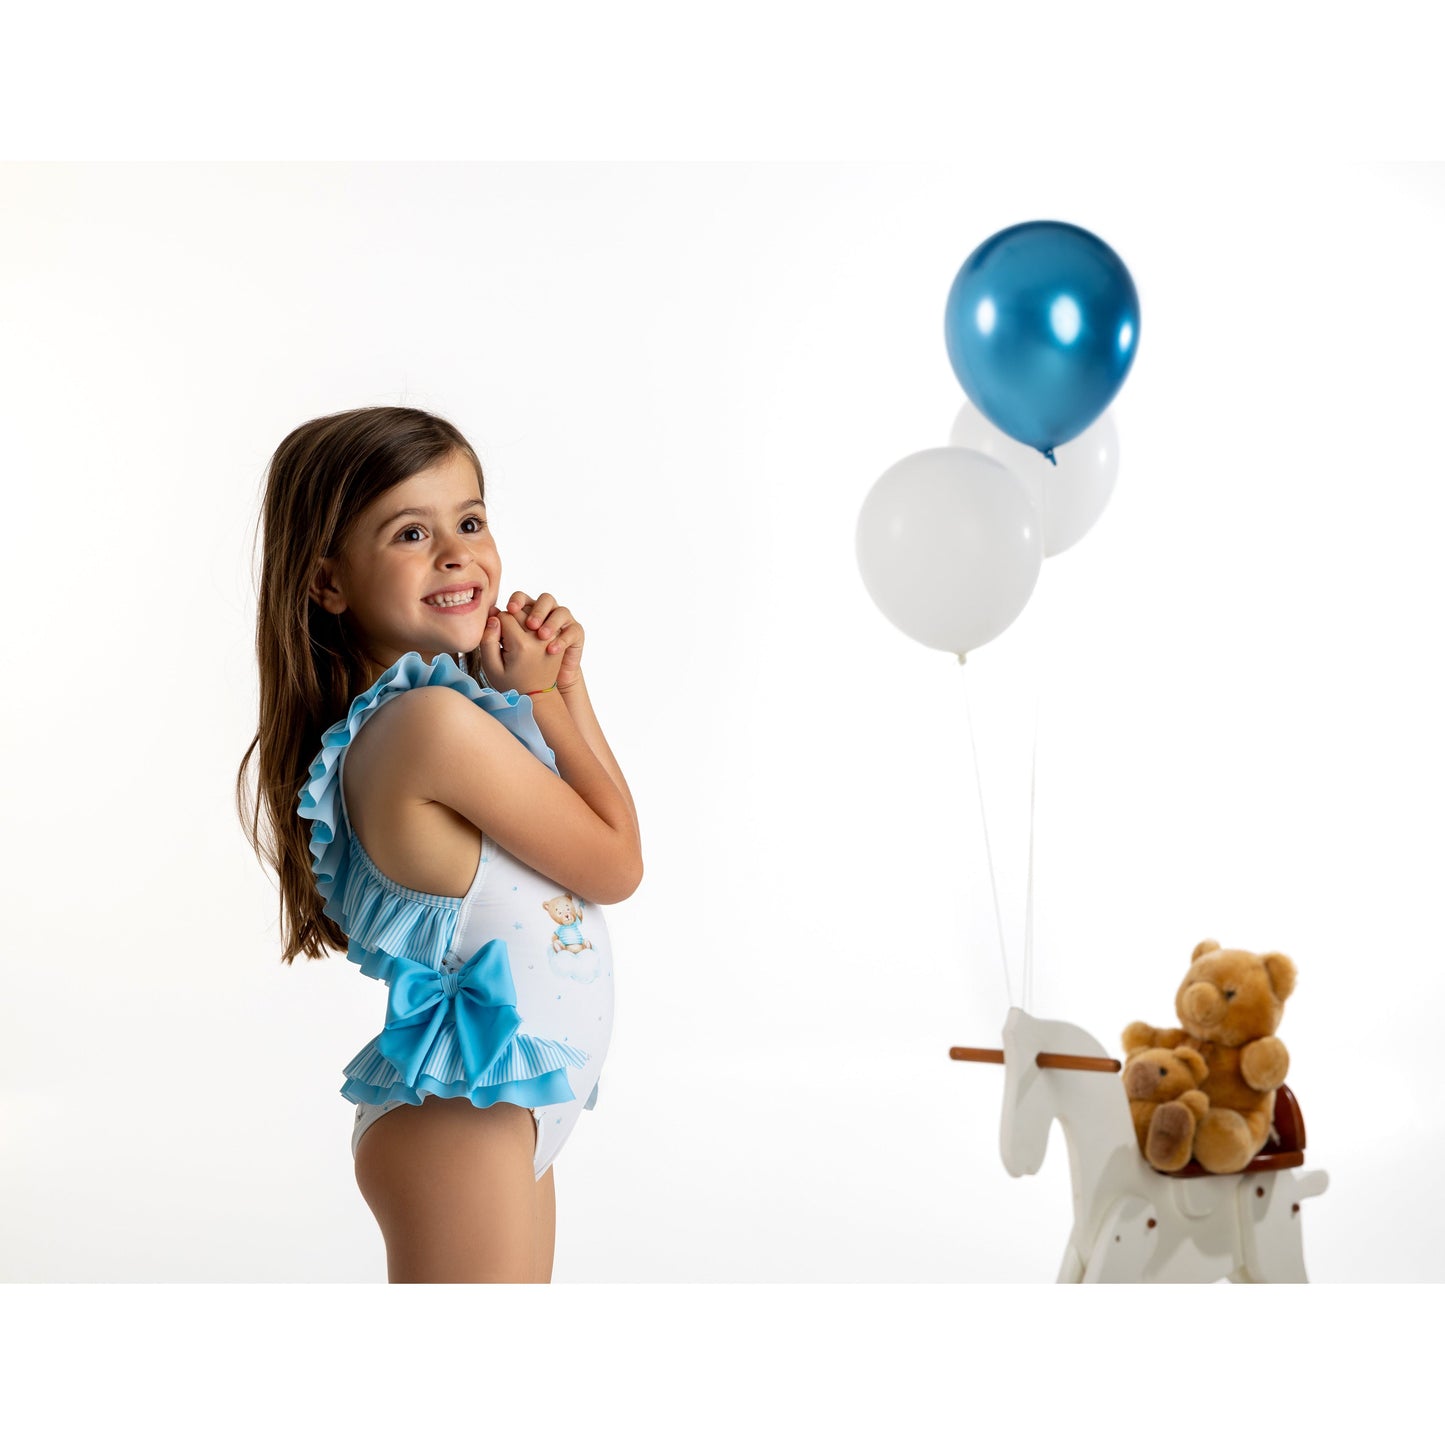 Load image into Gallery viewer, Girls teddy bear swimming costume by Meia Pata - Adora
